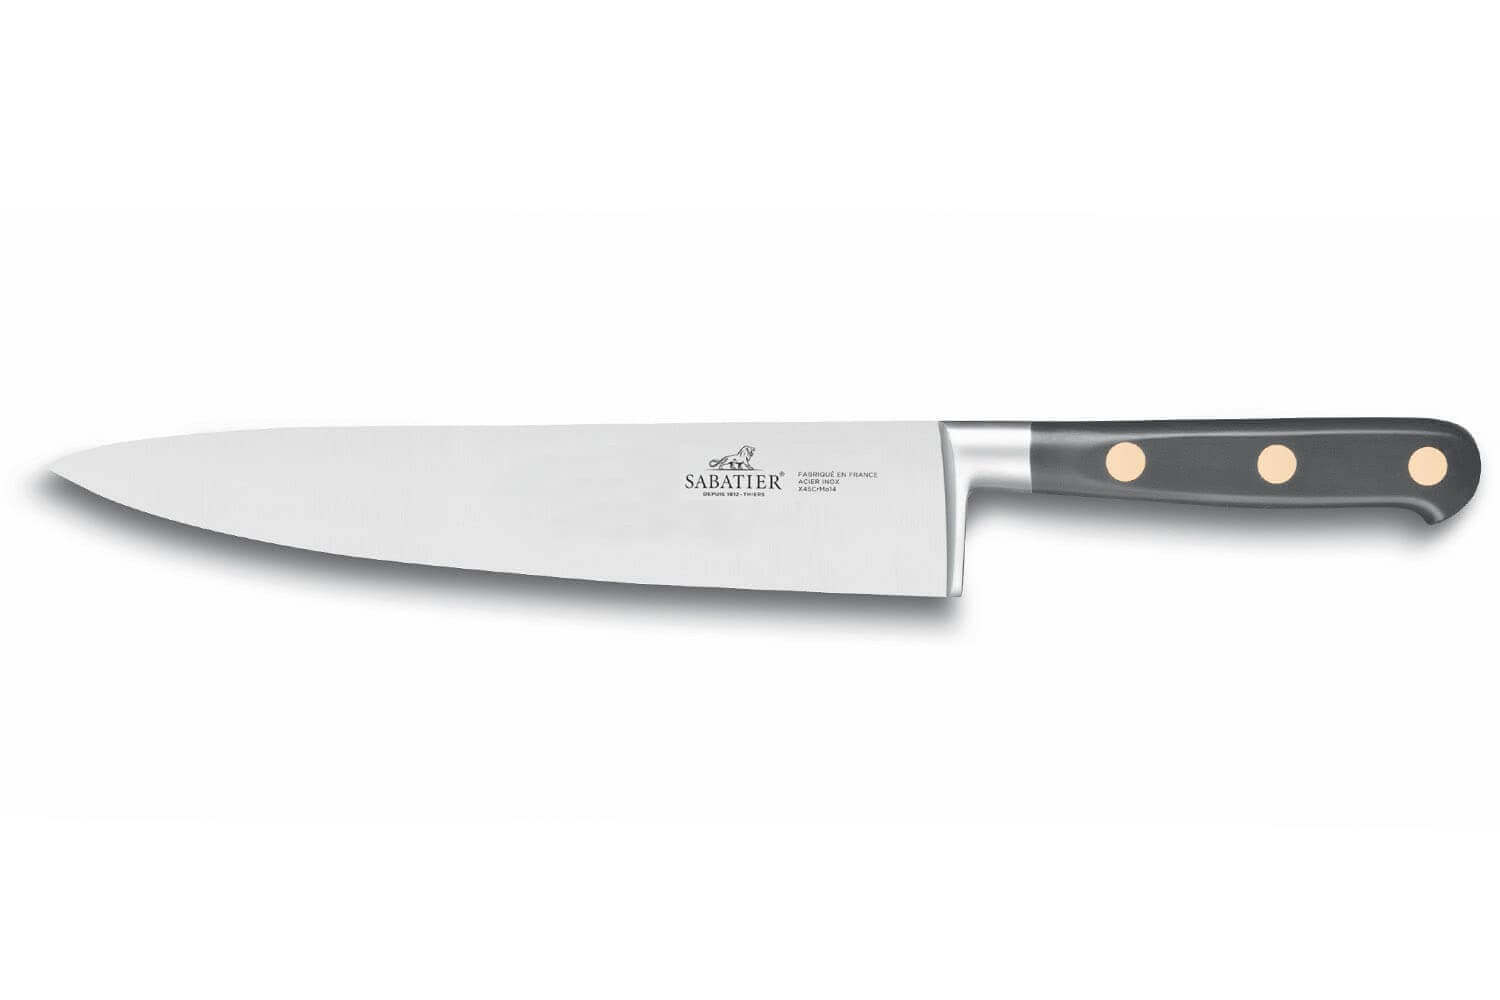 Couteau chef 20 cm Duo - Arcos